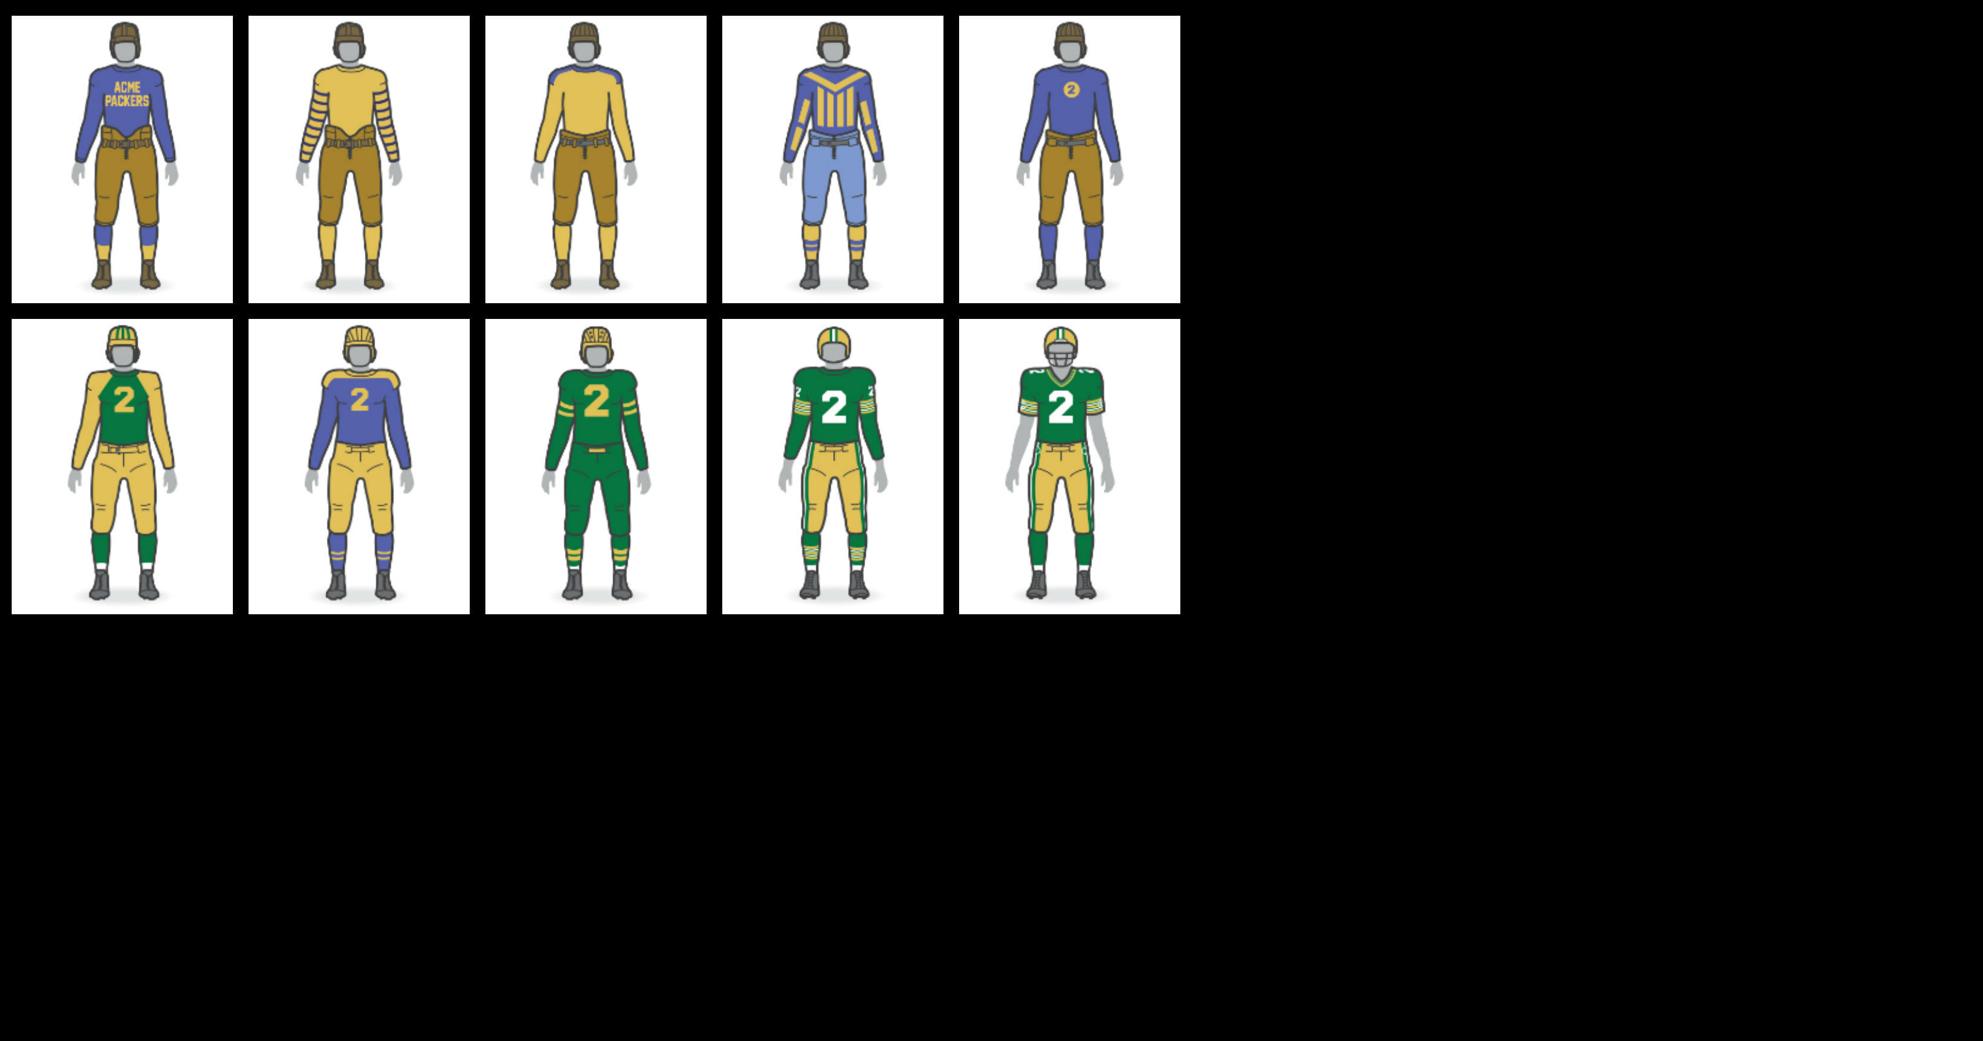 Infographic: 100 Seasons of Packers uniforms